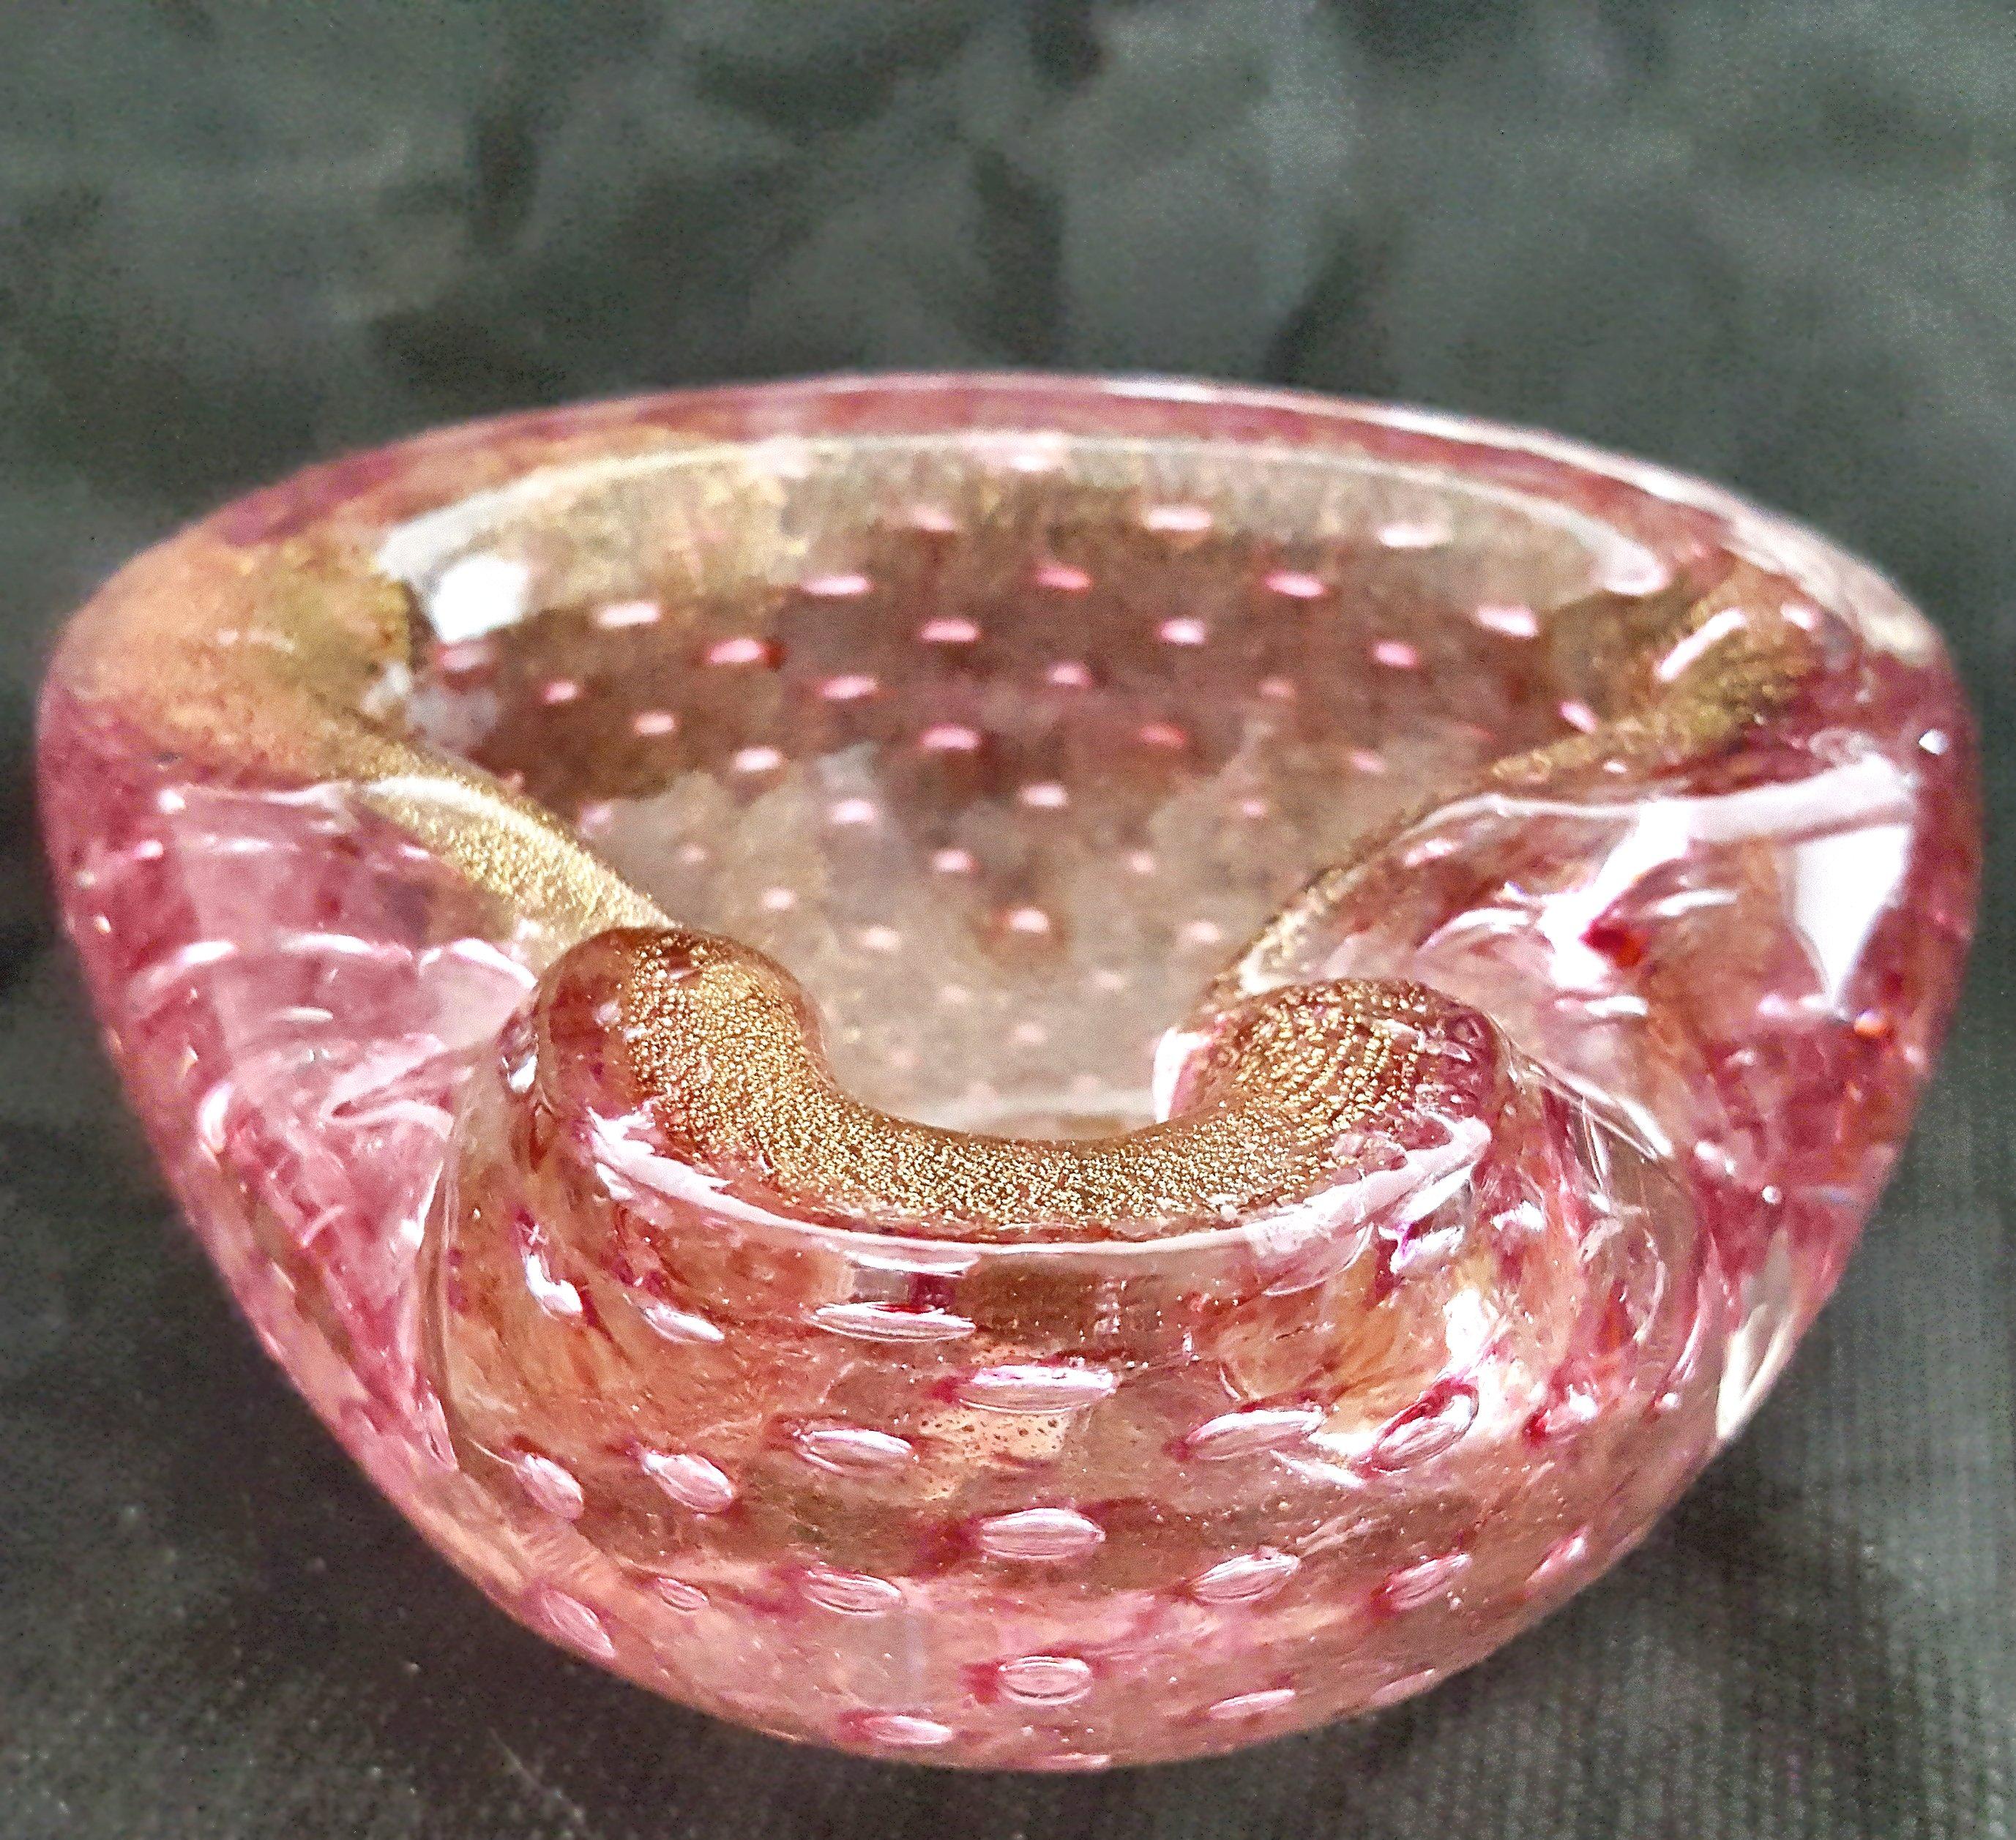 Murano Glass Bowl with Bullicante, Gold Polveri, Original Label Zanetti &

Pustetto & Zanetti Murano Glass Bowl with Bullicante, Gold Polveri, Original Label remains/remnant on bottom.
Color seems almost a watermelon hue. The glass is infused with